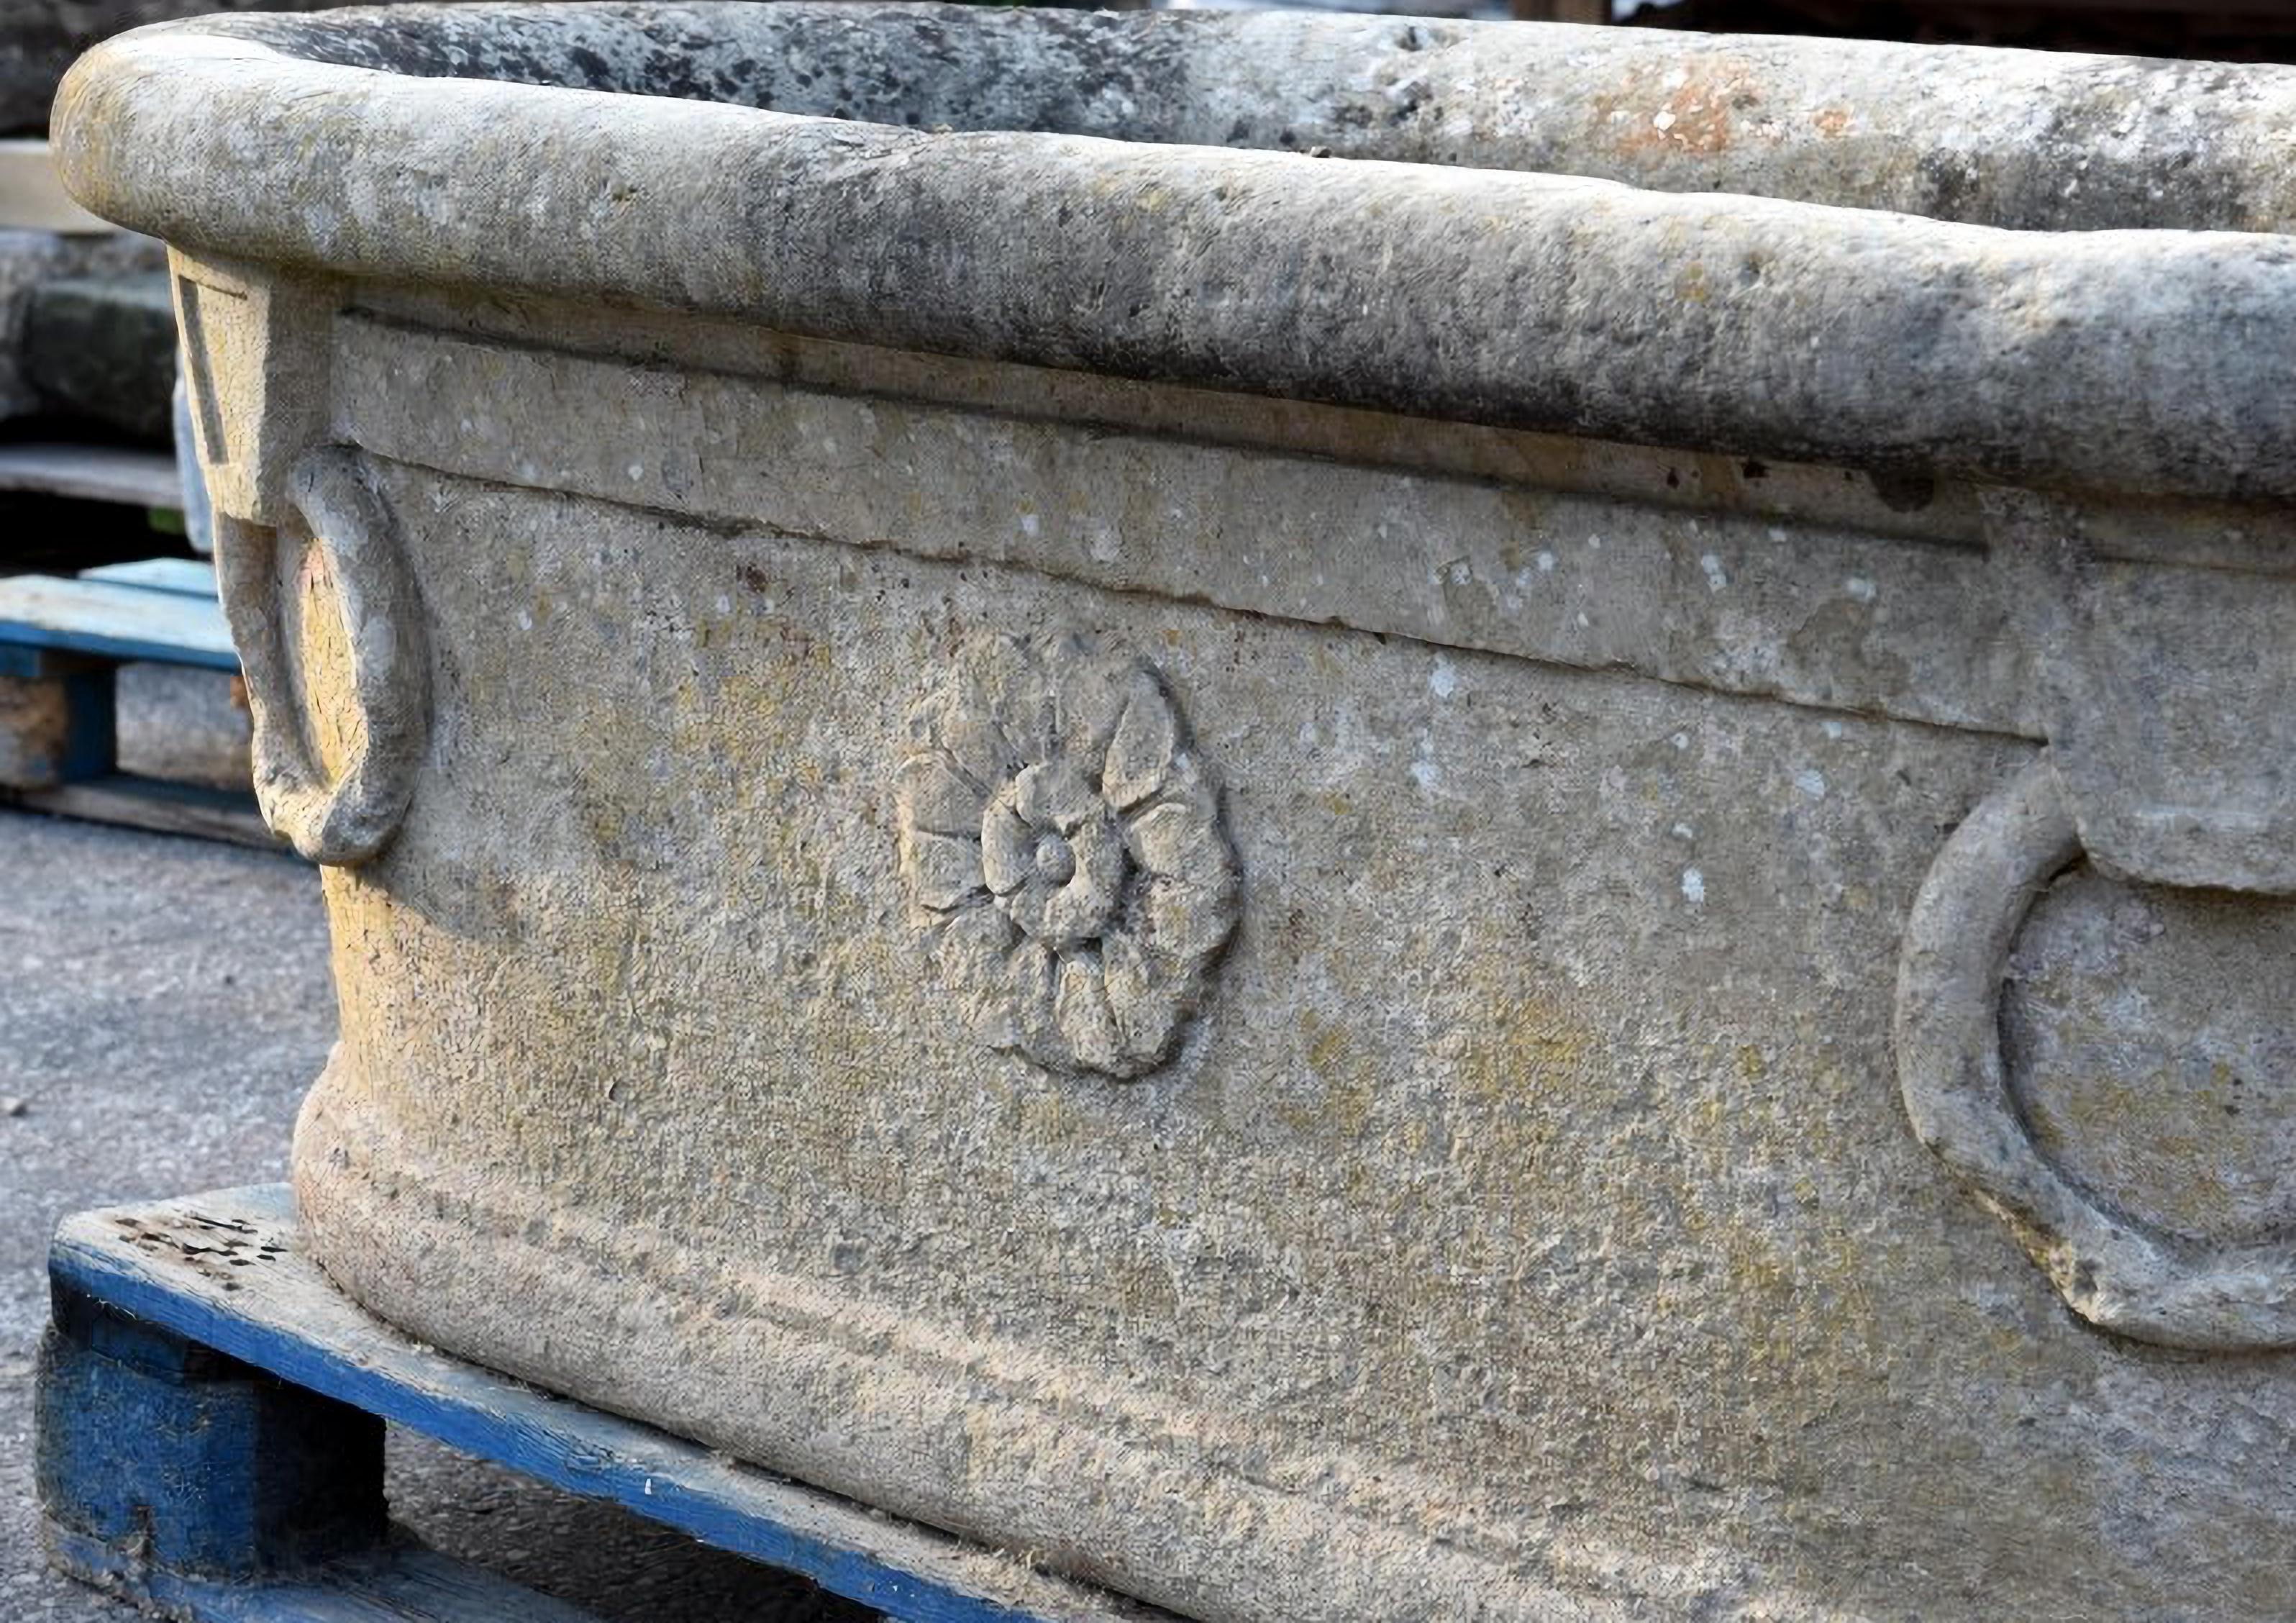 19th Century RINGED DOUBLE SIDED STONE FRENCH EMPIRE TUB

Empire tub in double-sided stone with rings
HEIGHT 52cm
WIDTH 86cms
LENGTH 150cm
INTERNAL DEPTH OF THE BASIN 45 cm
WEIGHT 550 Kg
MATERIAL Limestone
INTERNAL MEASURES 120 X 58 cm
Good